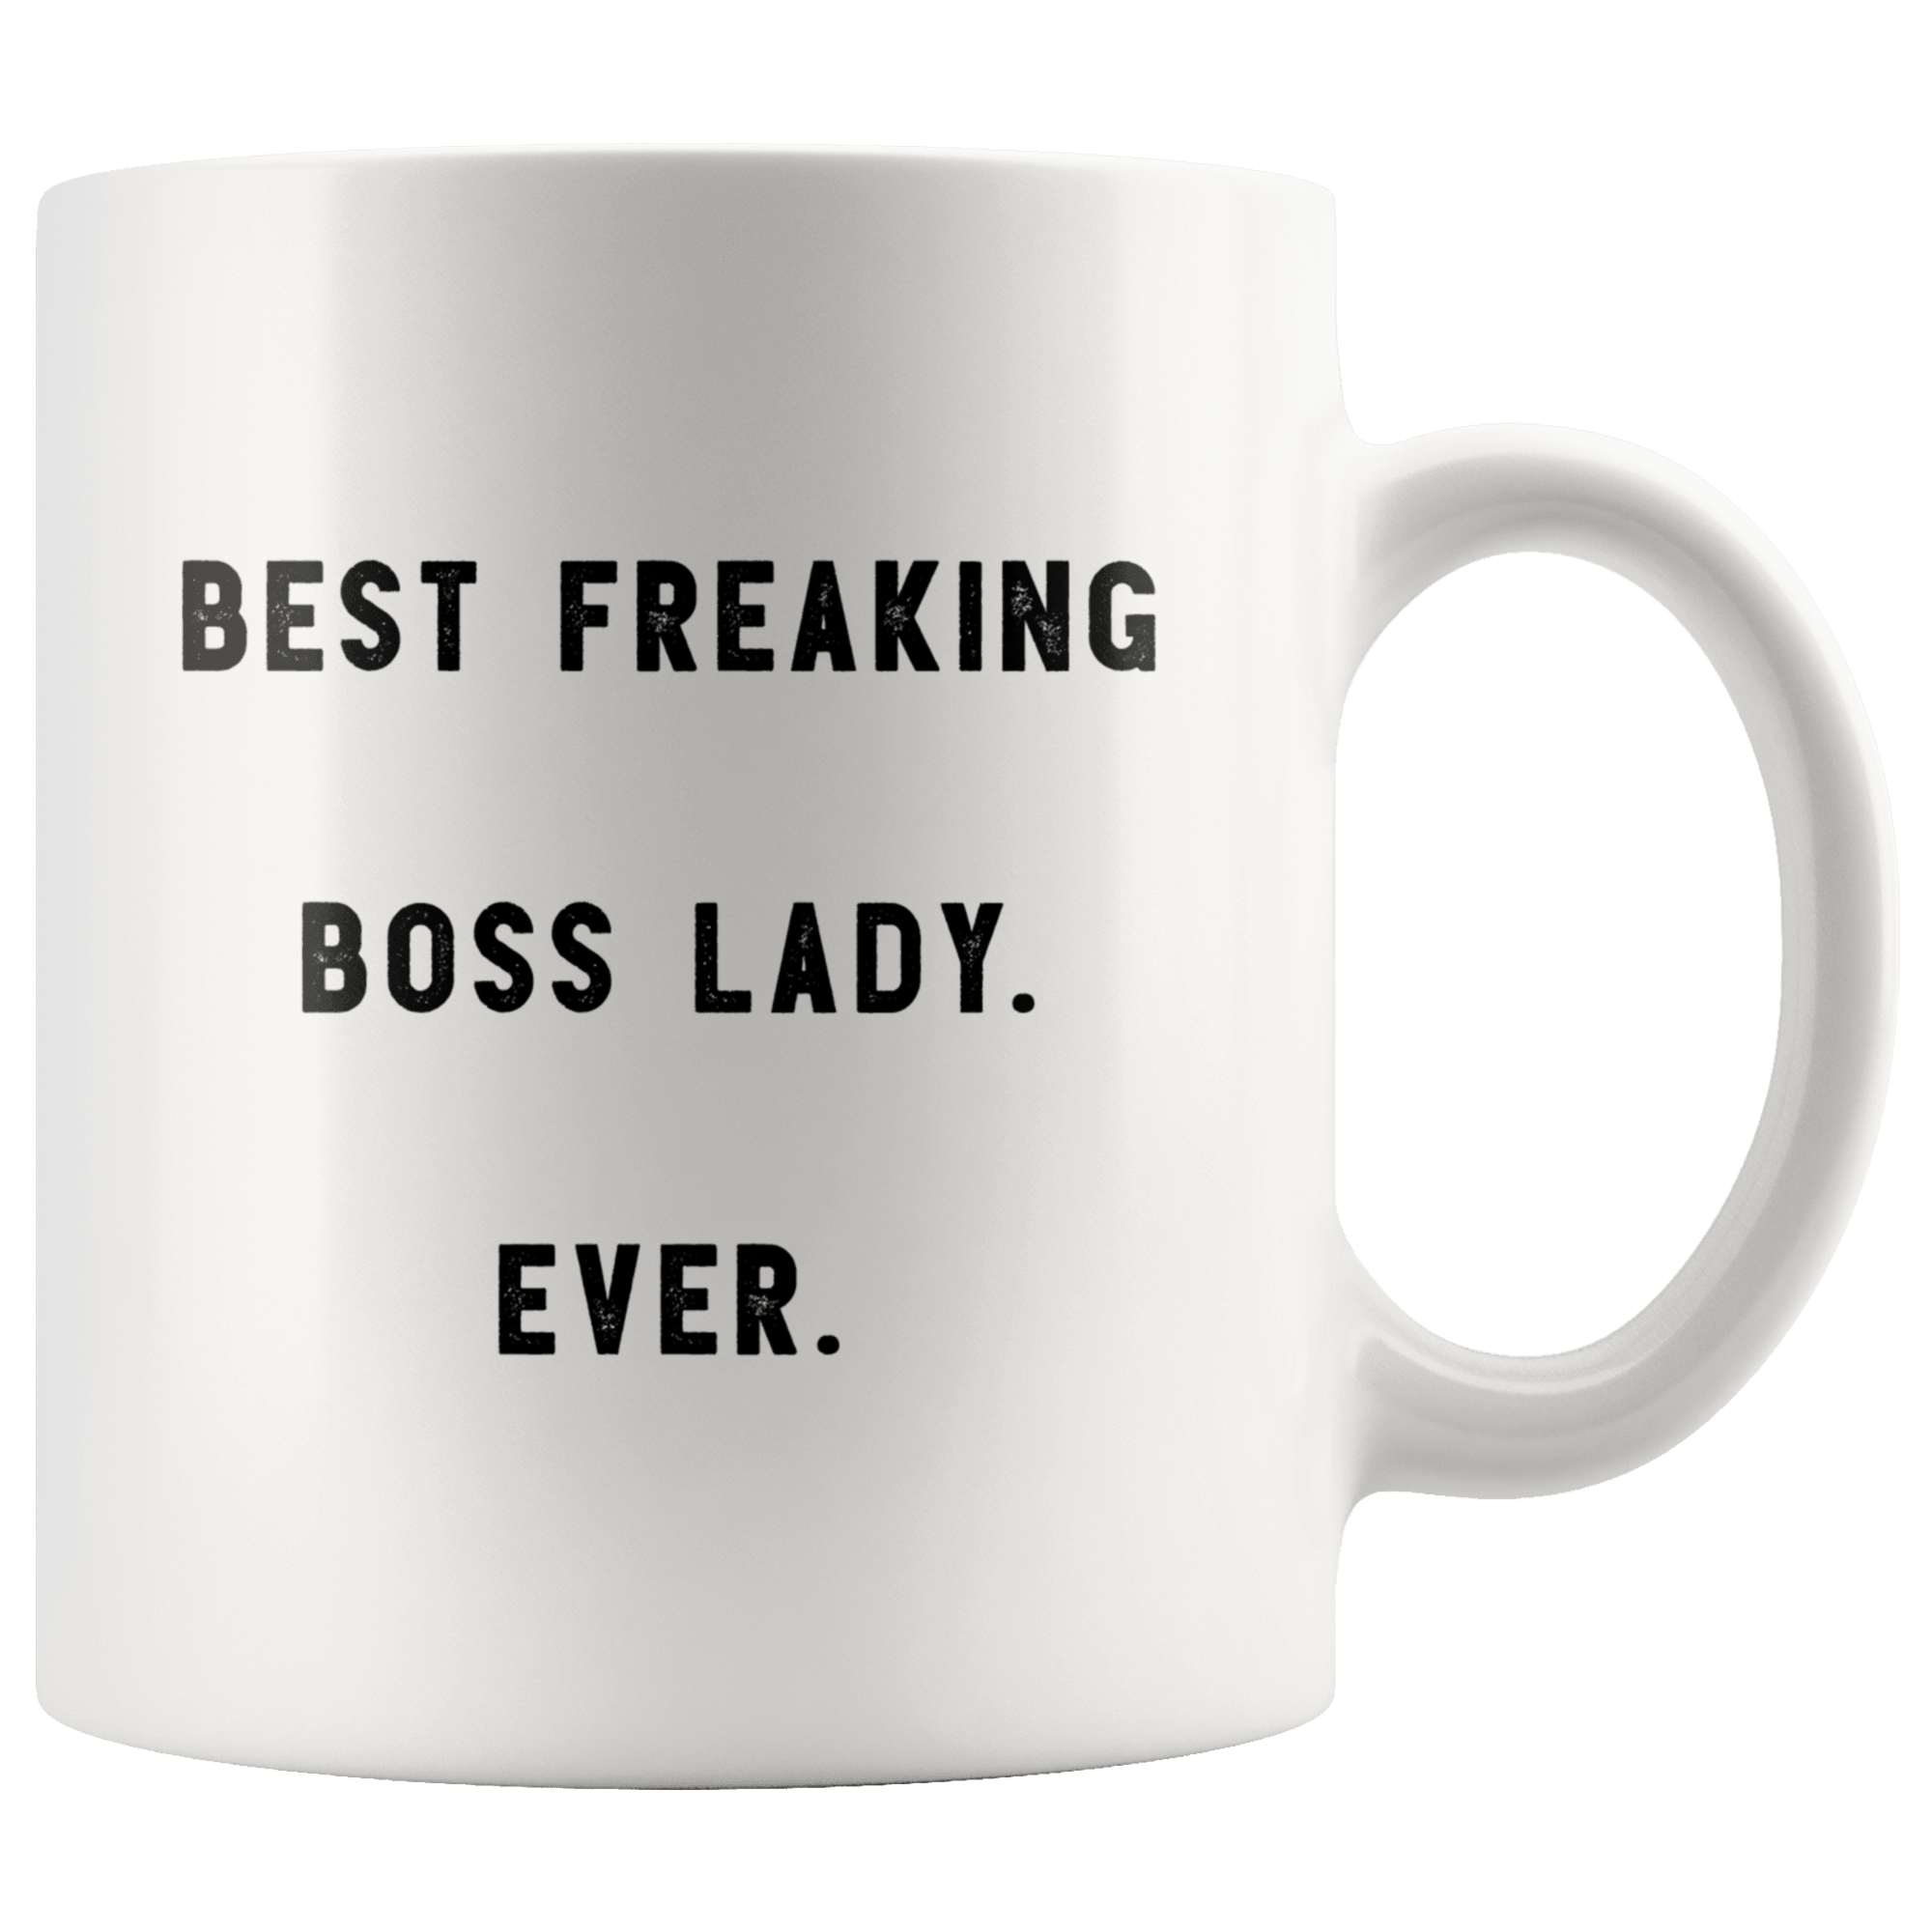 Top Performer Award - Office Gifts - Employee Recognition Awards -  woodgeekstore